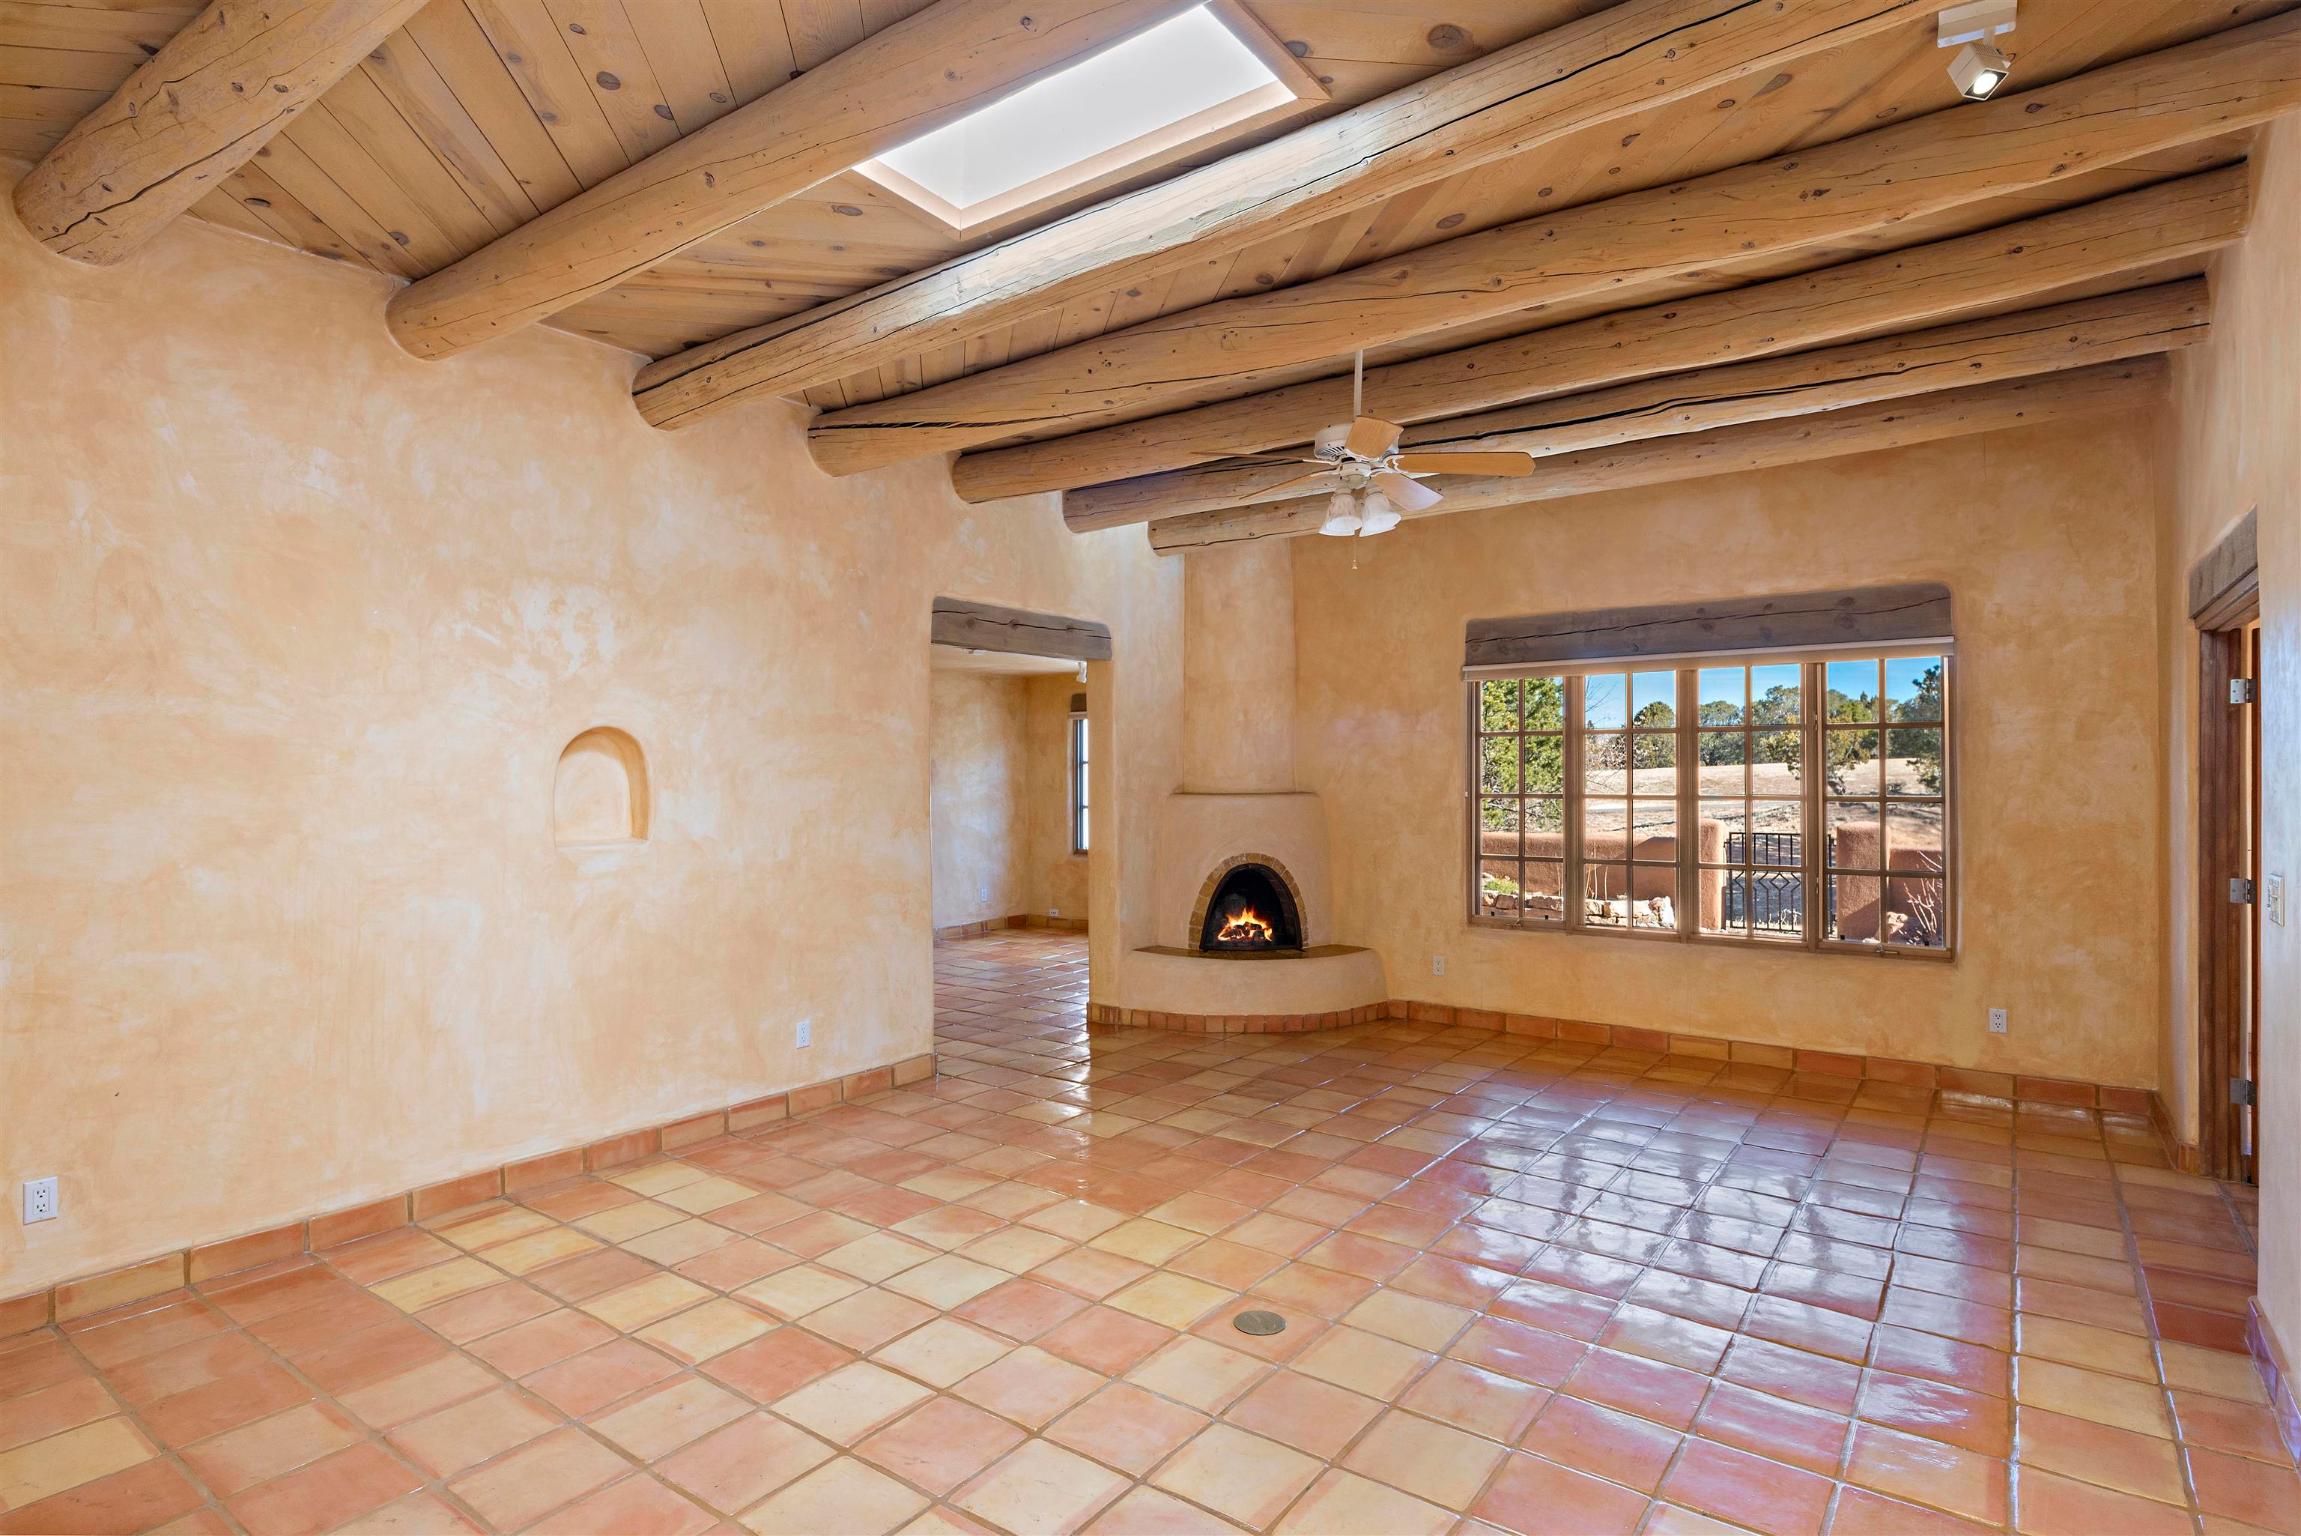 3101 Old Pecos Trail, 719, Santa Fe, New Mexico 87505, 2 Bedrooms Bedrooms, ,2 BathroomsBathrooms,Residential,For Sale,3101 Old Pecos Trail, 719,202200834